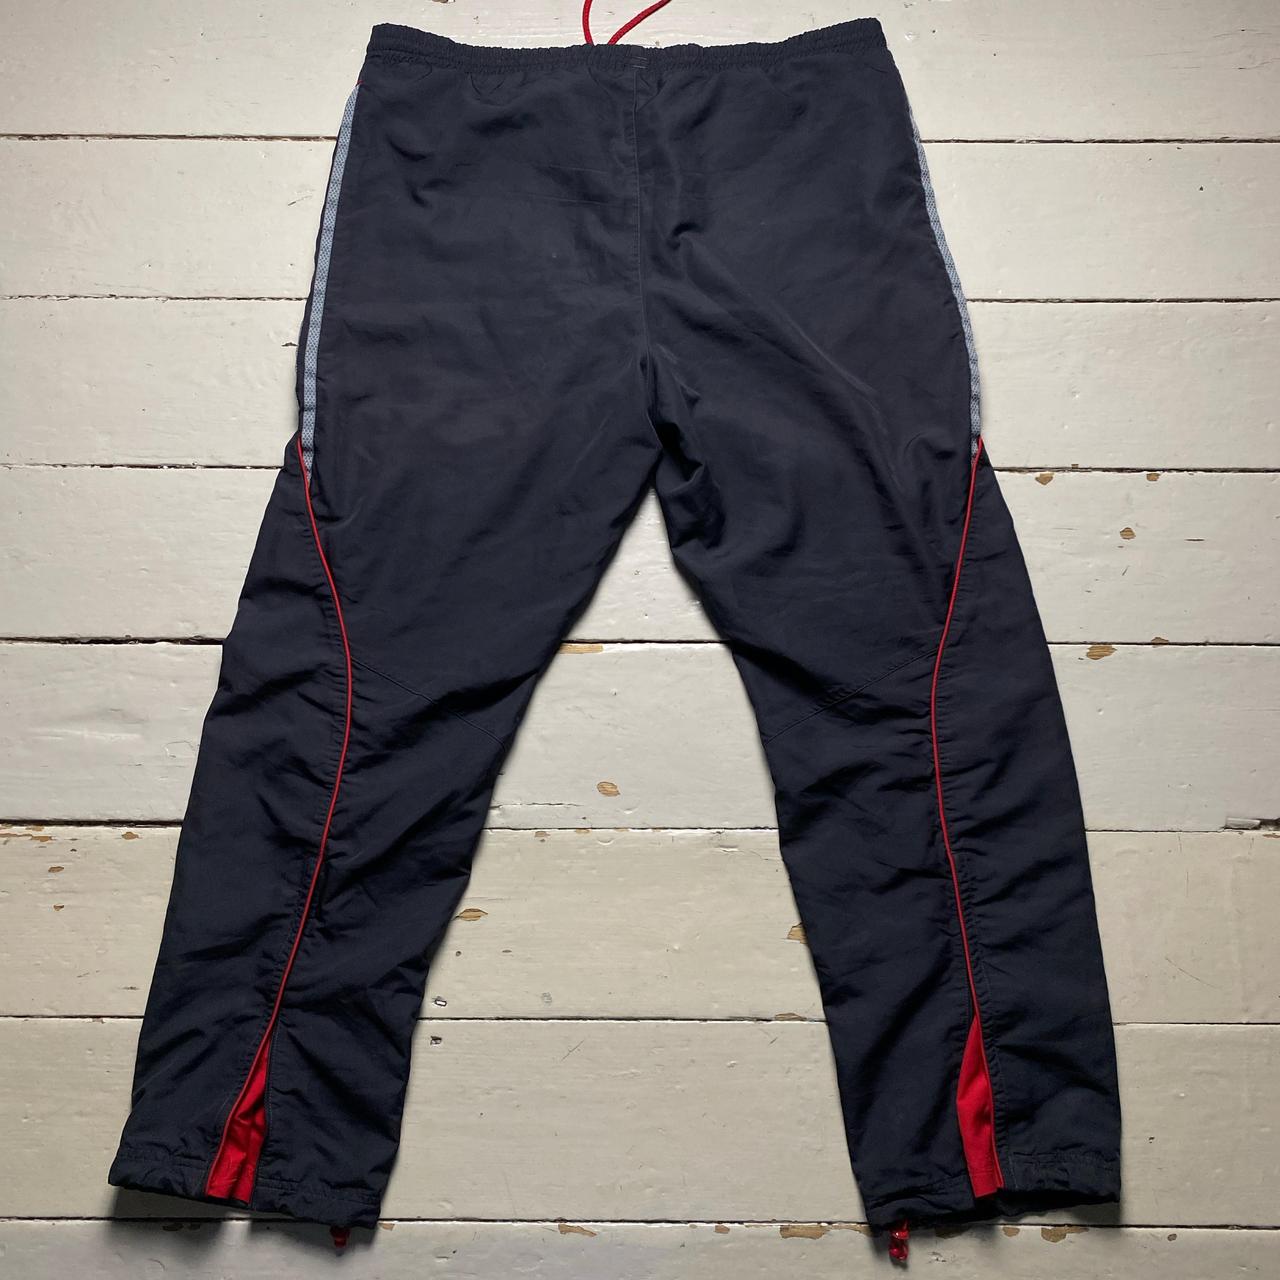 Adidas Baggy Vintage Black and Red Shell Trackpant Bottoms